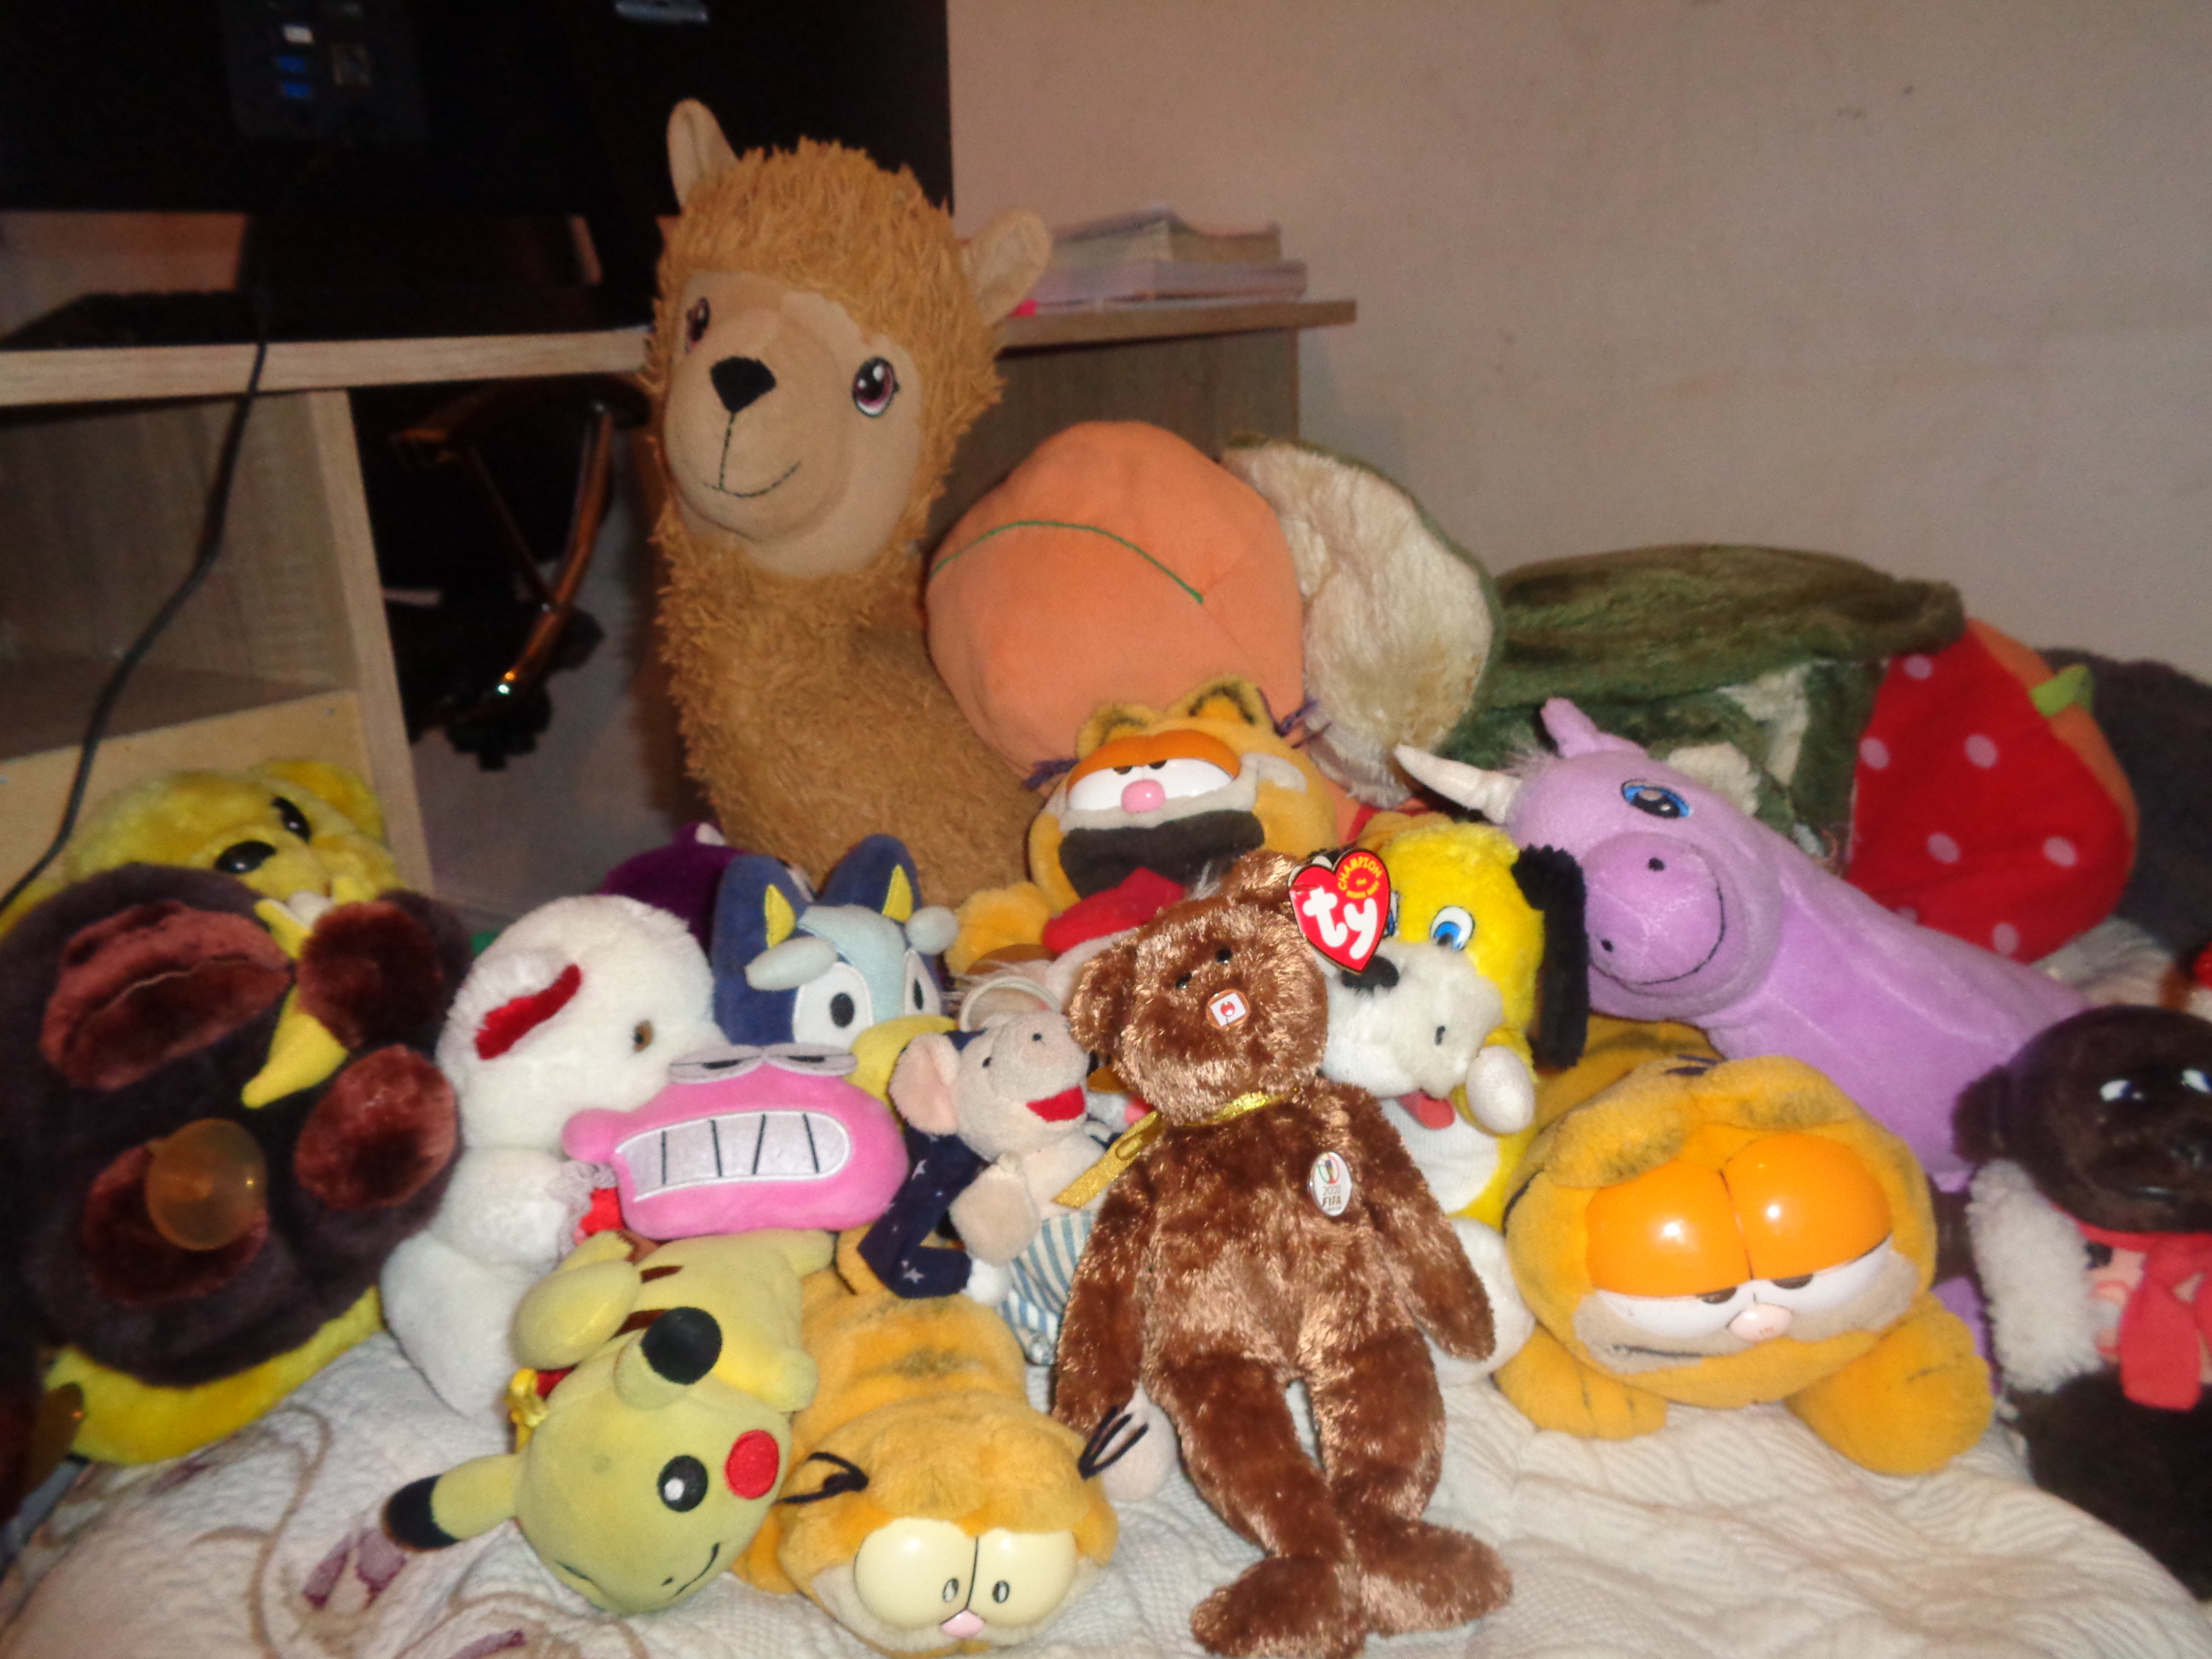 A pile of plushies on a bed.